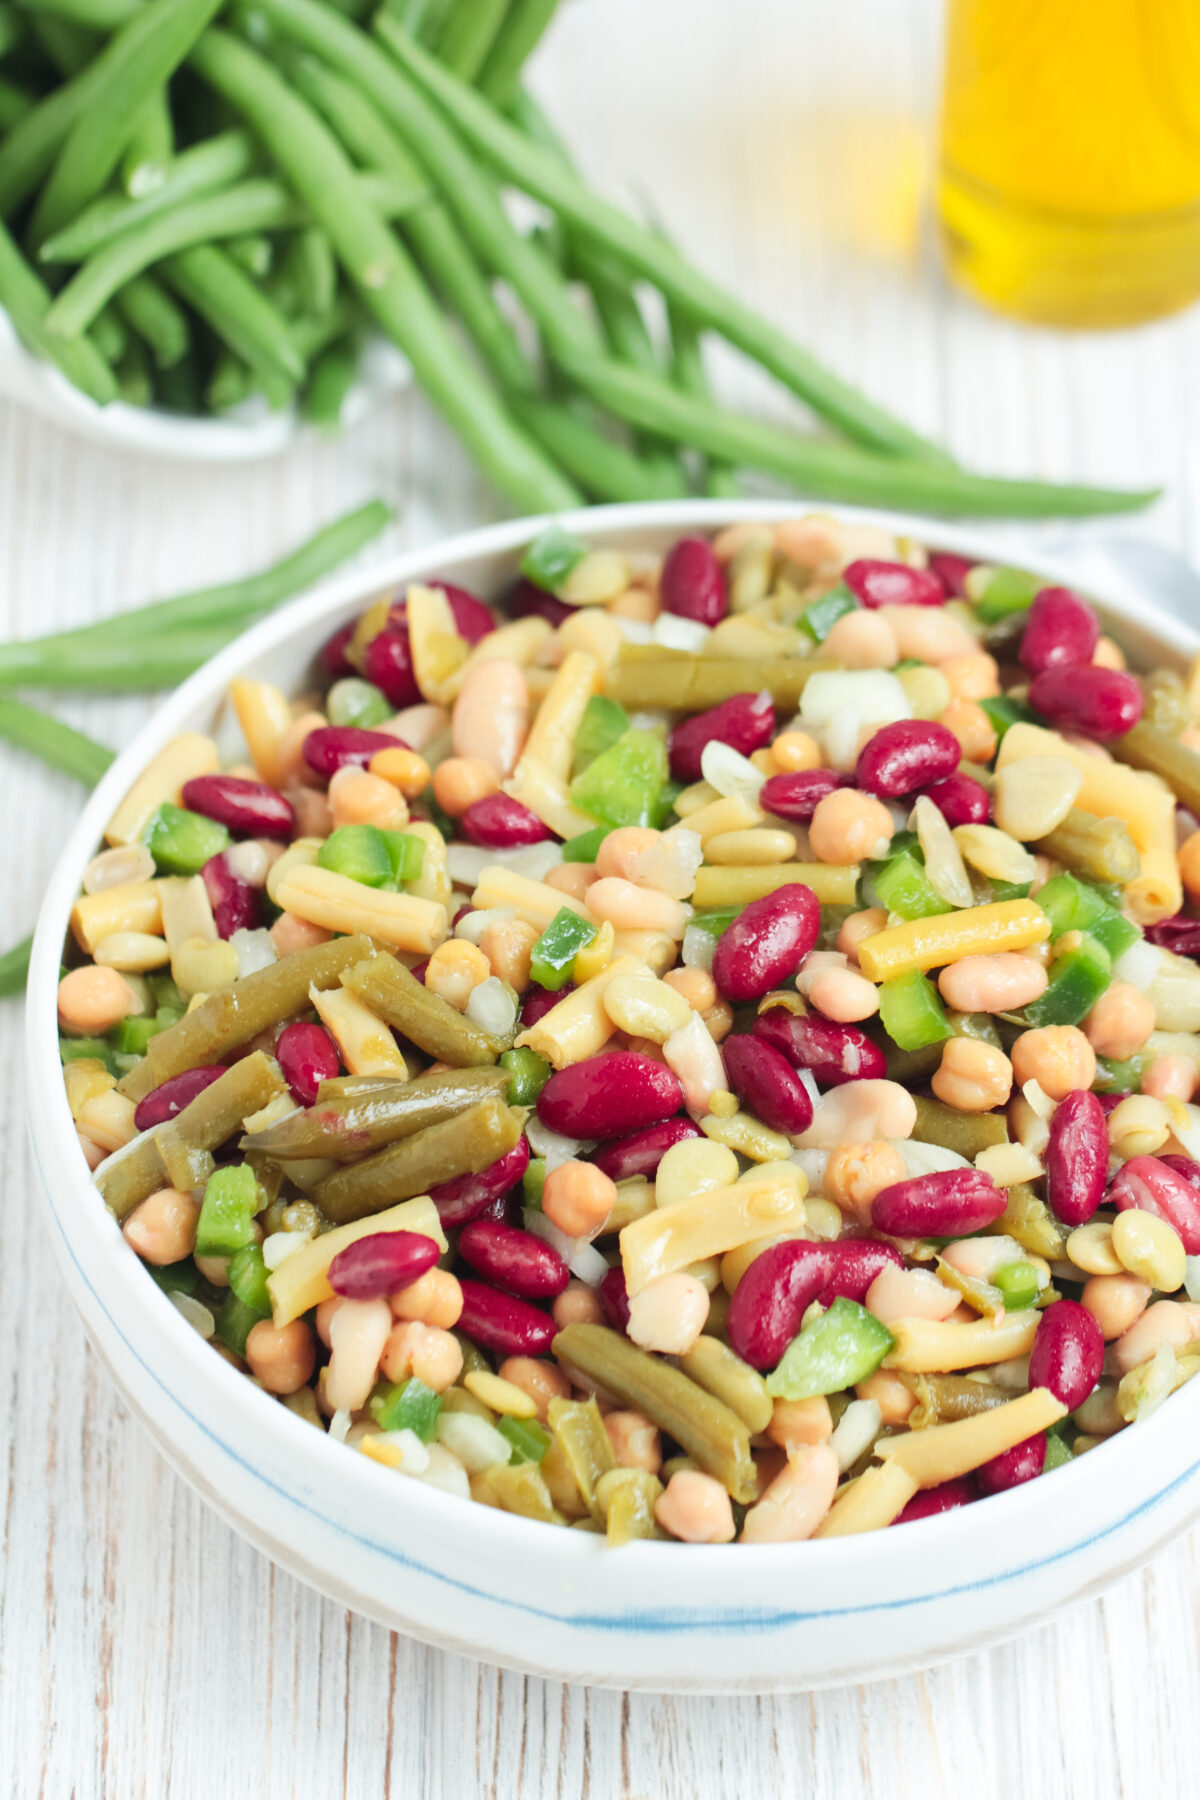 Make this simple, yet delicious 5 bean salad recipe in just 10 minutes. Perfect for potlucks and BBQs, this easy salad is sure to impress!